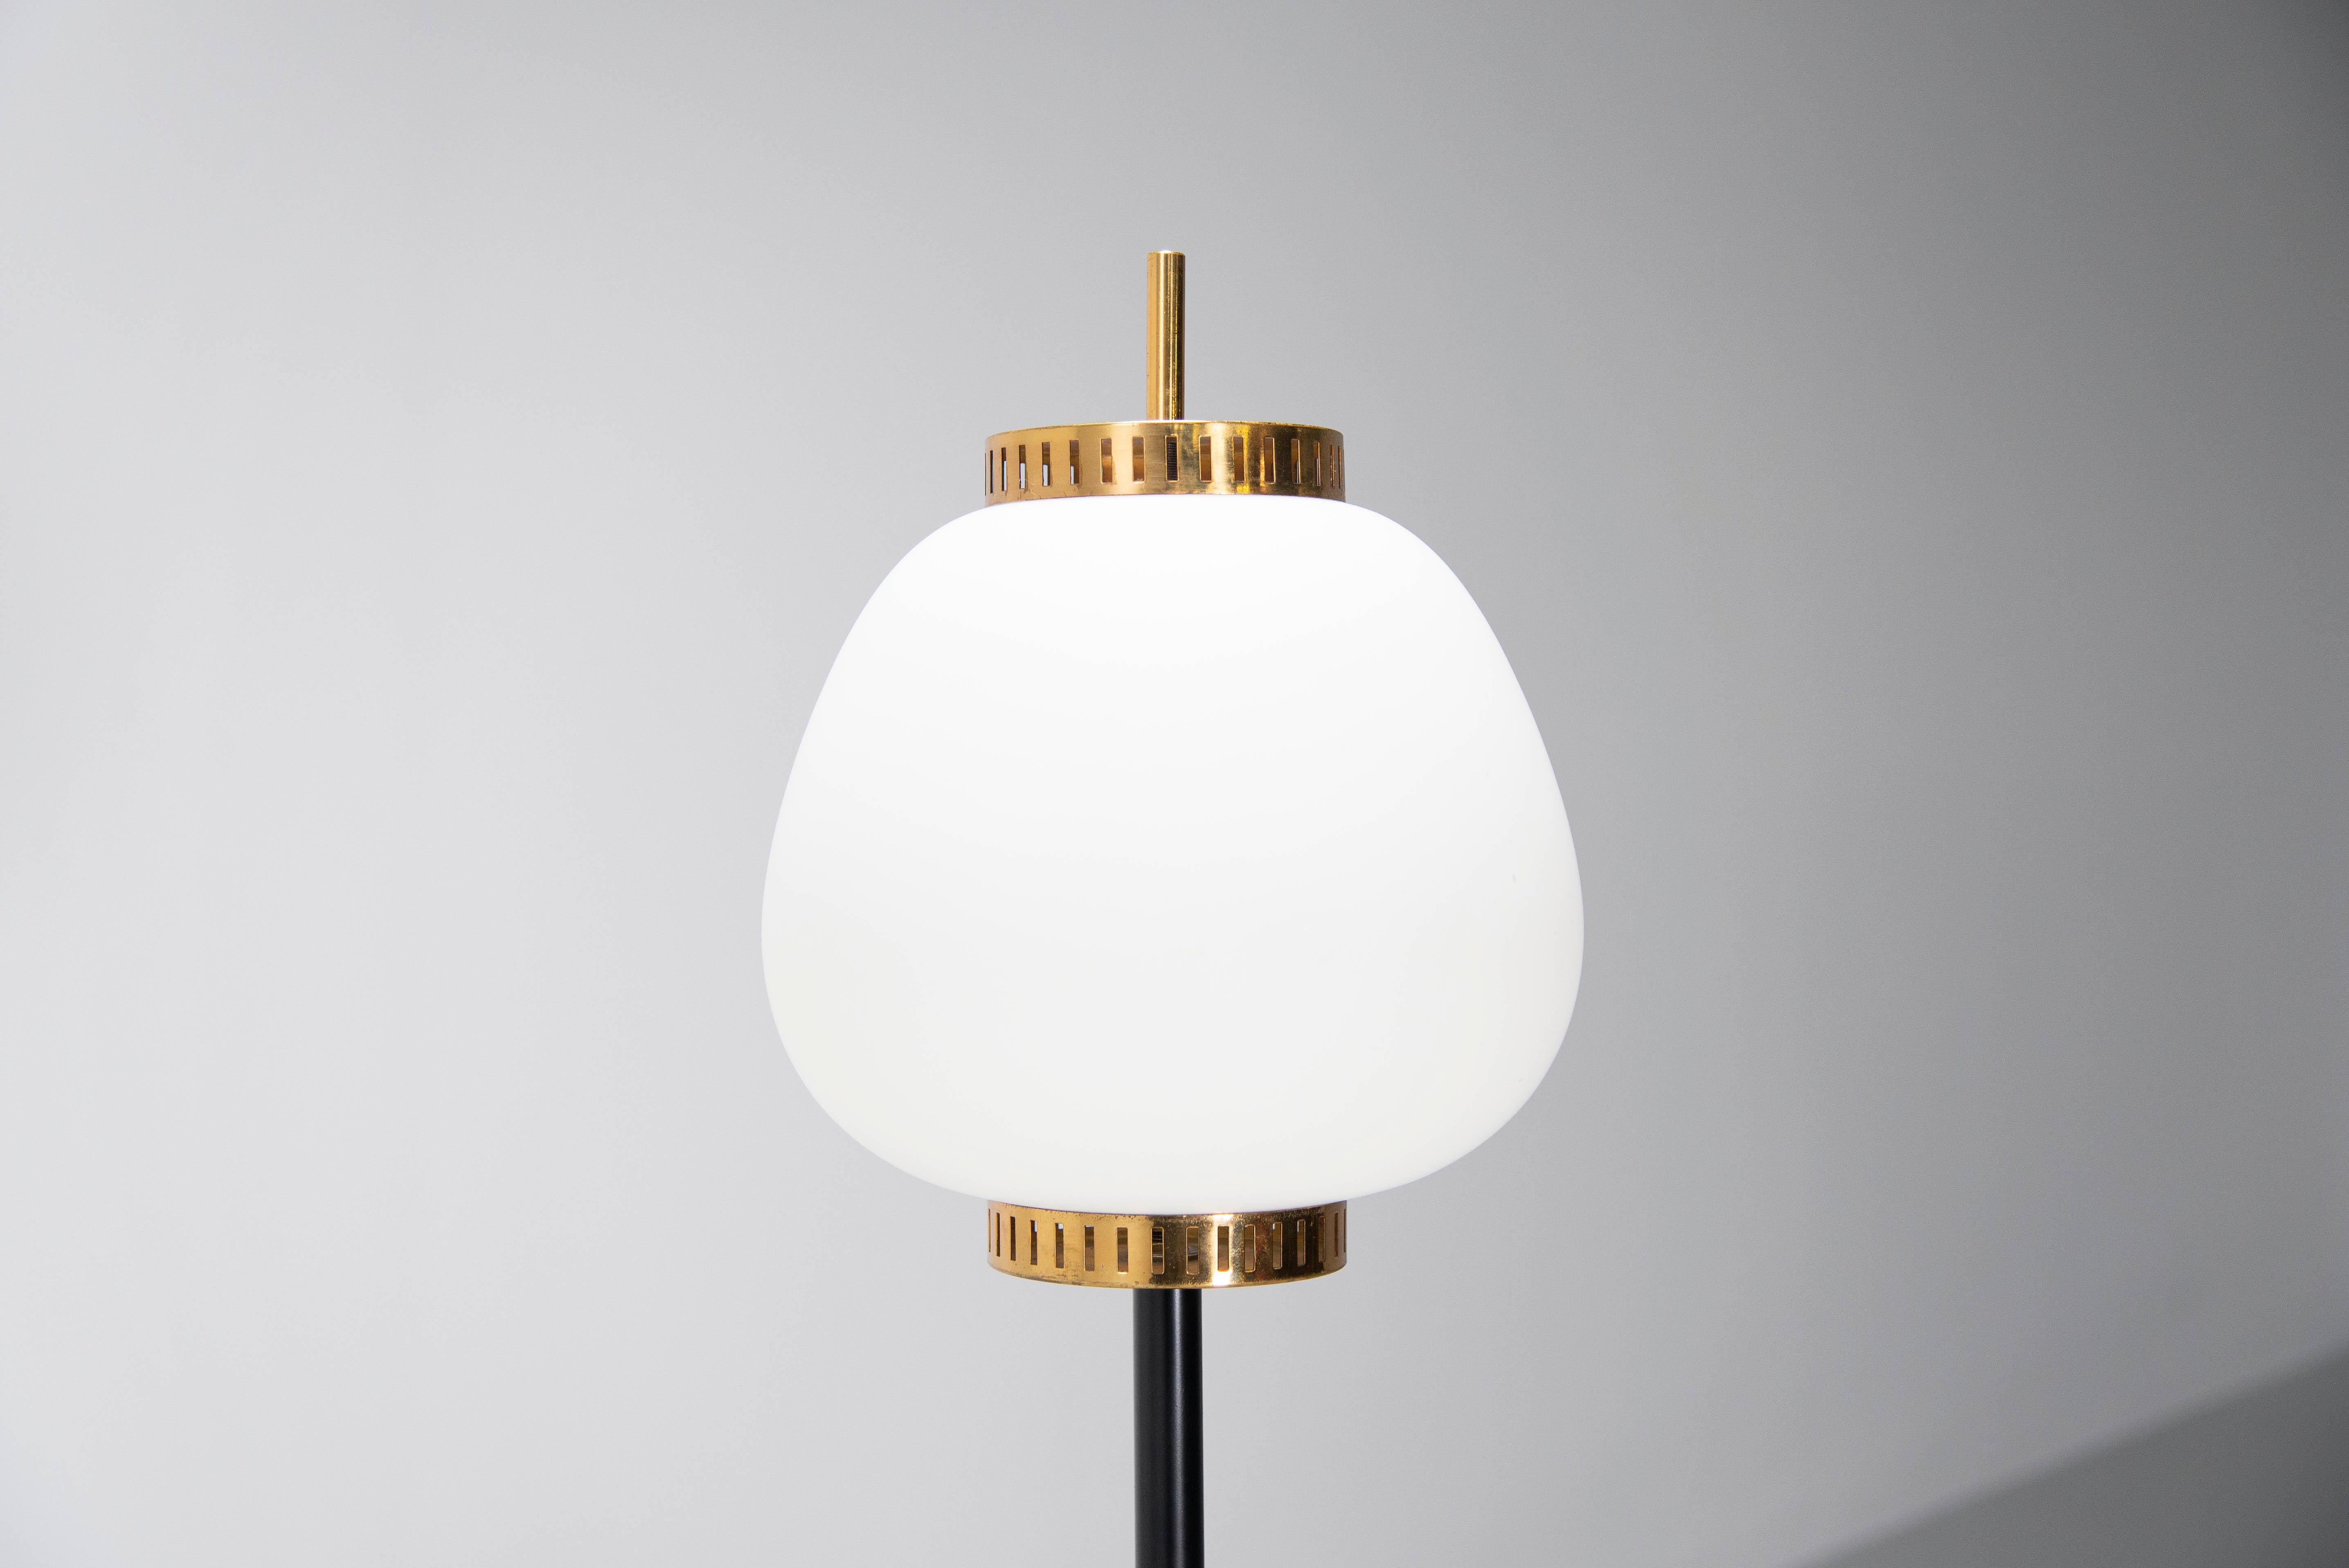 Very nice lantern floor lamp designed by Bruno Gatta and manufactured by Stilnovo, Italy 1950. This floor lamp has a 50s lantern shape and a round marble carrara marble base, a black painted stem and a milk glass shade with brass fittings. The lamp